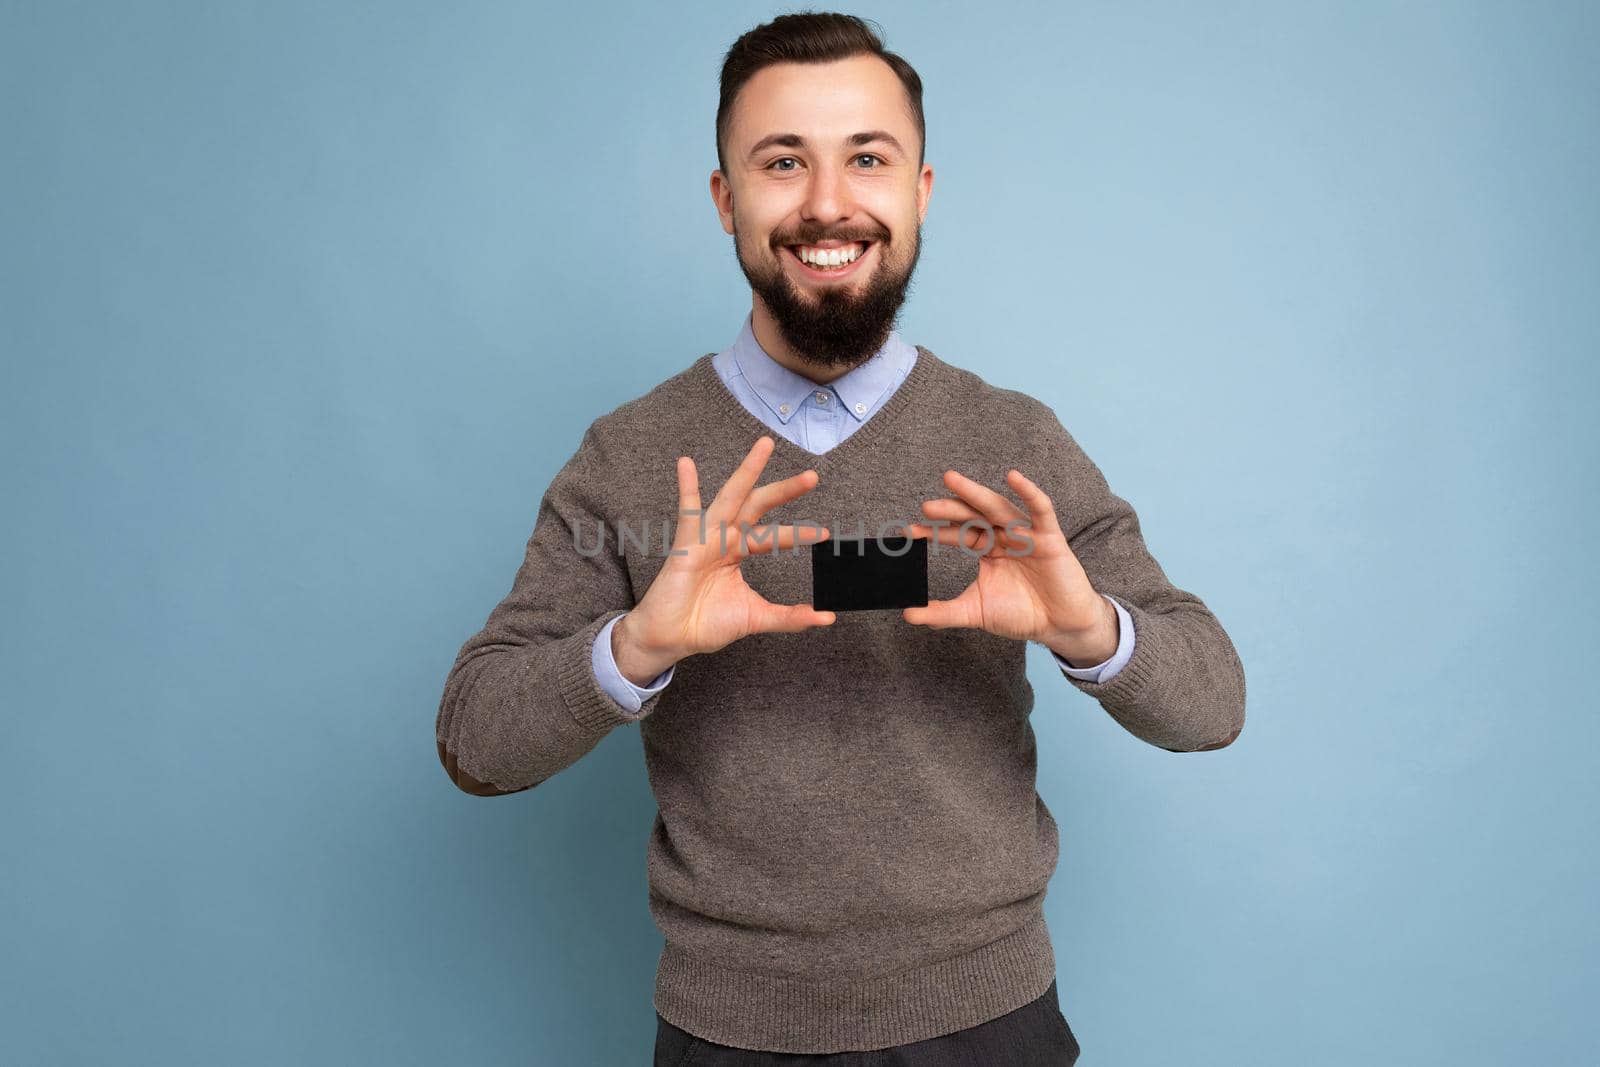 Handsome joyful smiling brunette bearded young man wearing grey sweater and blue shirt isolated on background wall holding credit card looking at camera.